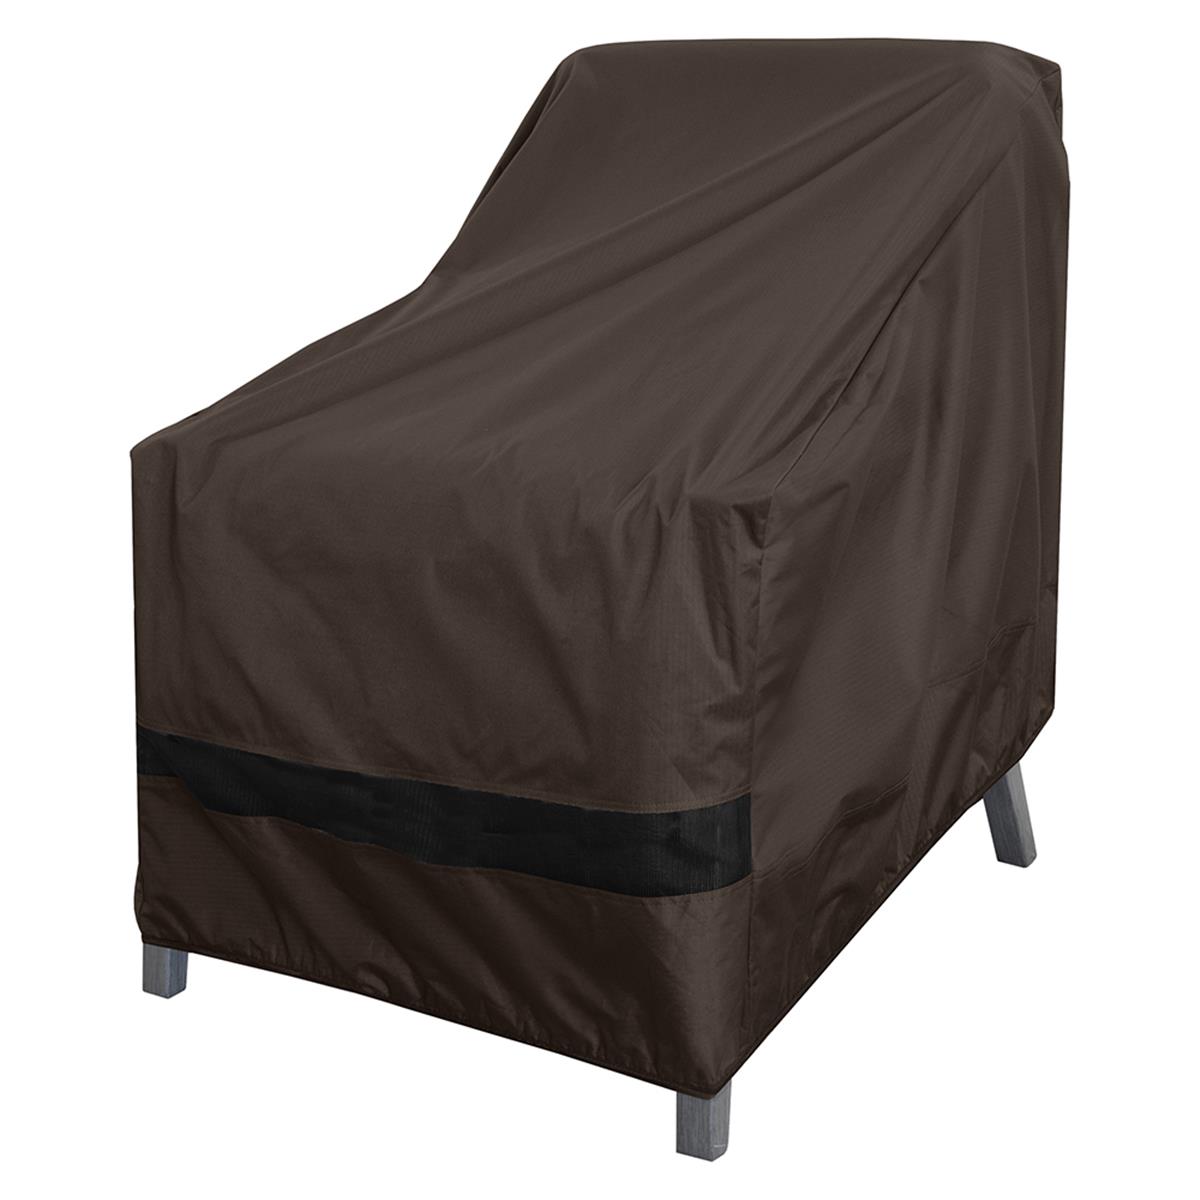 100538856 Patio Lounge Chair 600 Denier Rip Stop Cover